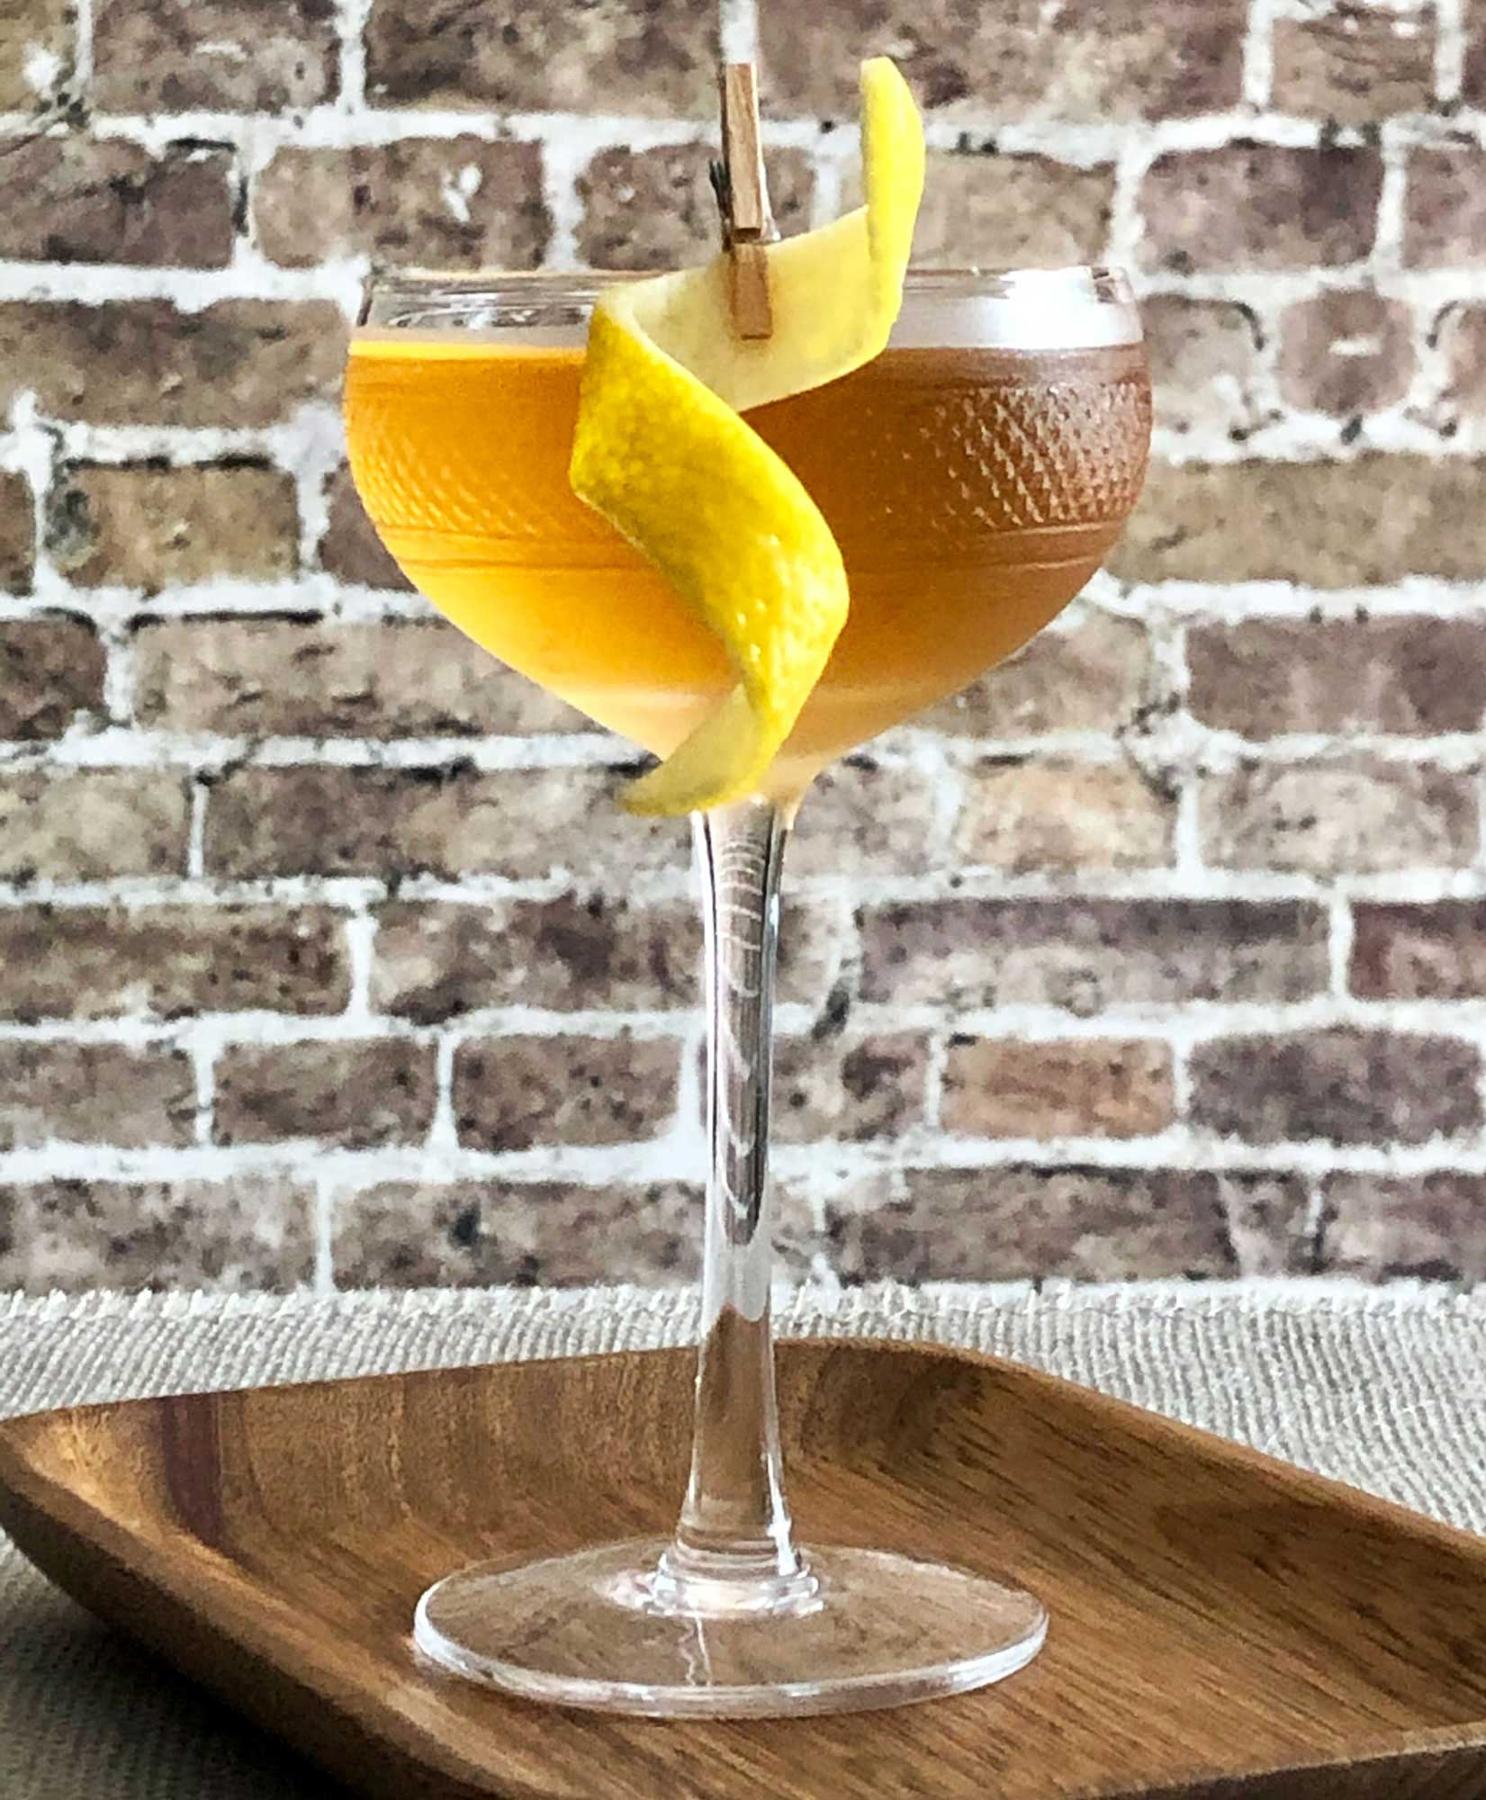 An example of the Empire, the mixed drink (drink), by Savoy Cocktail Book, featuring Hayman’s London Dry Gin, calvados, Rothman & Winter Orchard Apricot Liqueur, and lemon twist; photo by Lee Edwards